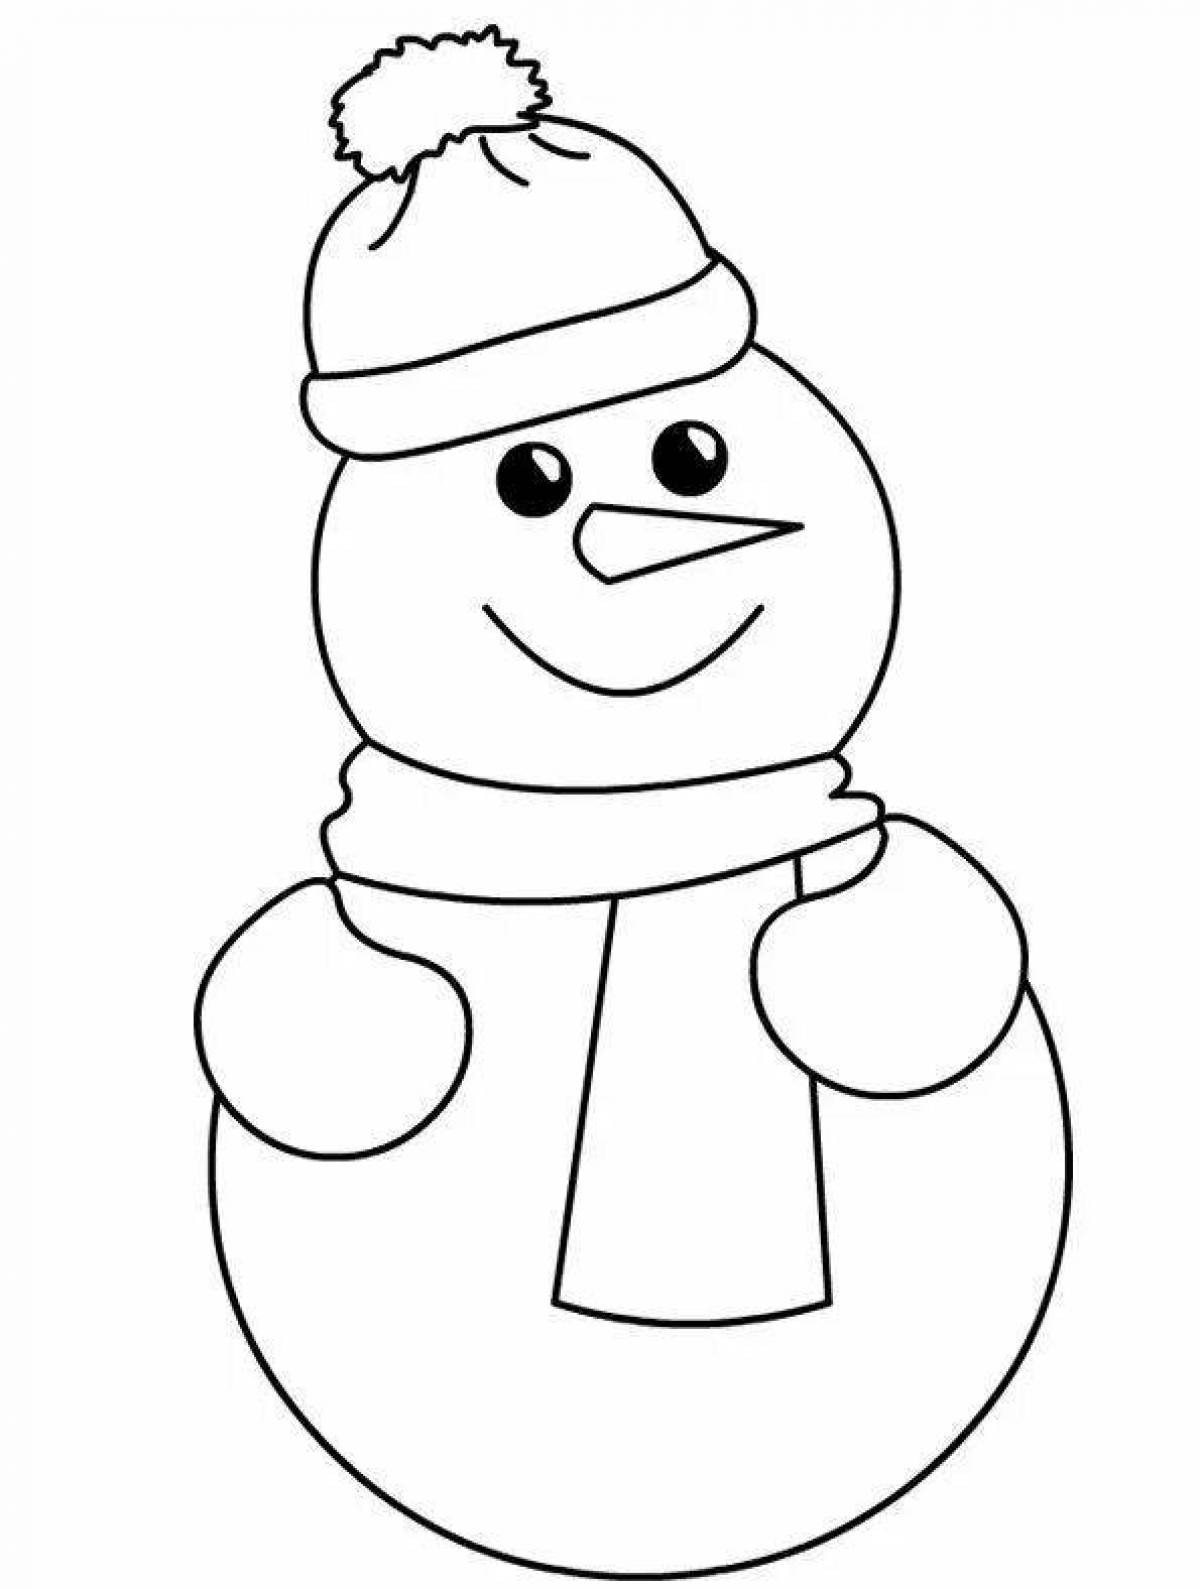 Humorous snowman coloring page